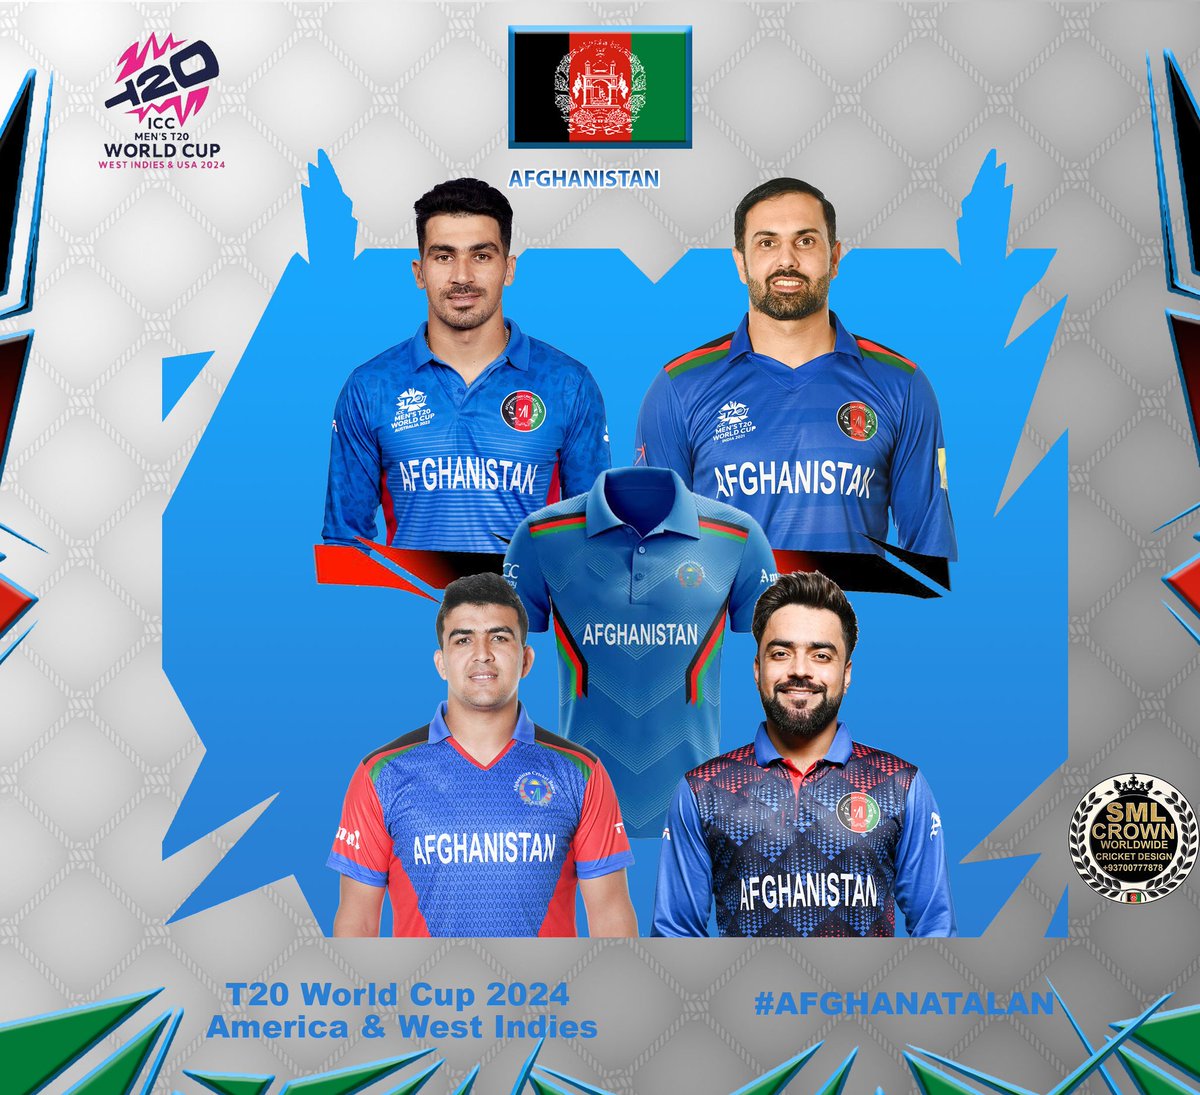 Afghanistan all time gorgeous kits, which one is more beautiful.   🇦🇫  1️⃣.2️⃣.3️⃣.4️⃣ or 5️⃣.

Tell me on below 👇 comments me.

#AfghanAtalan | #T20WorldCup2024